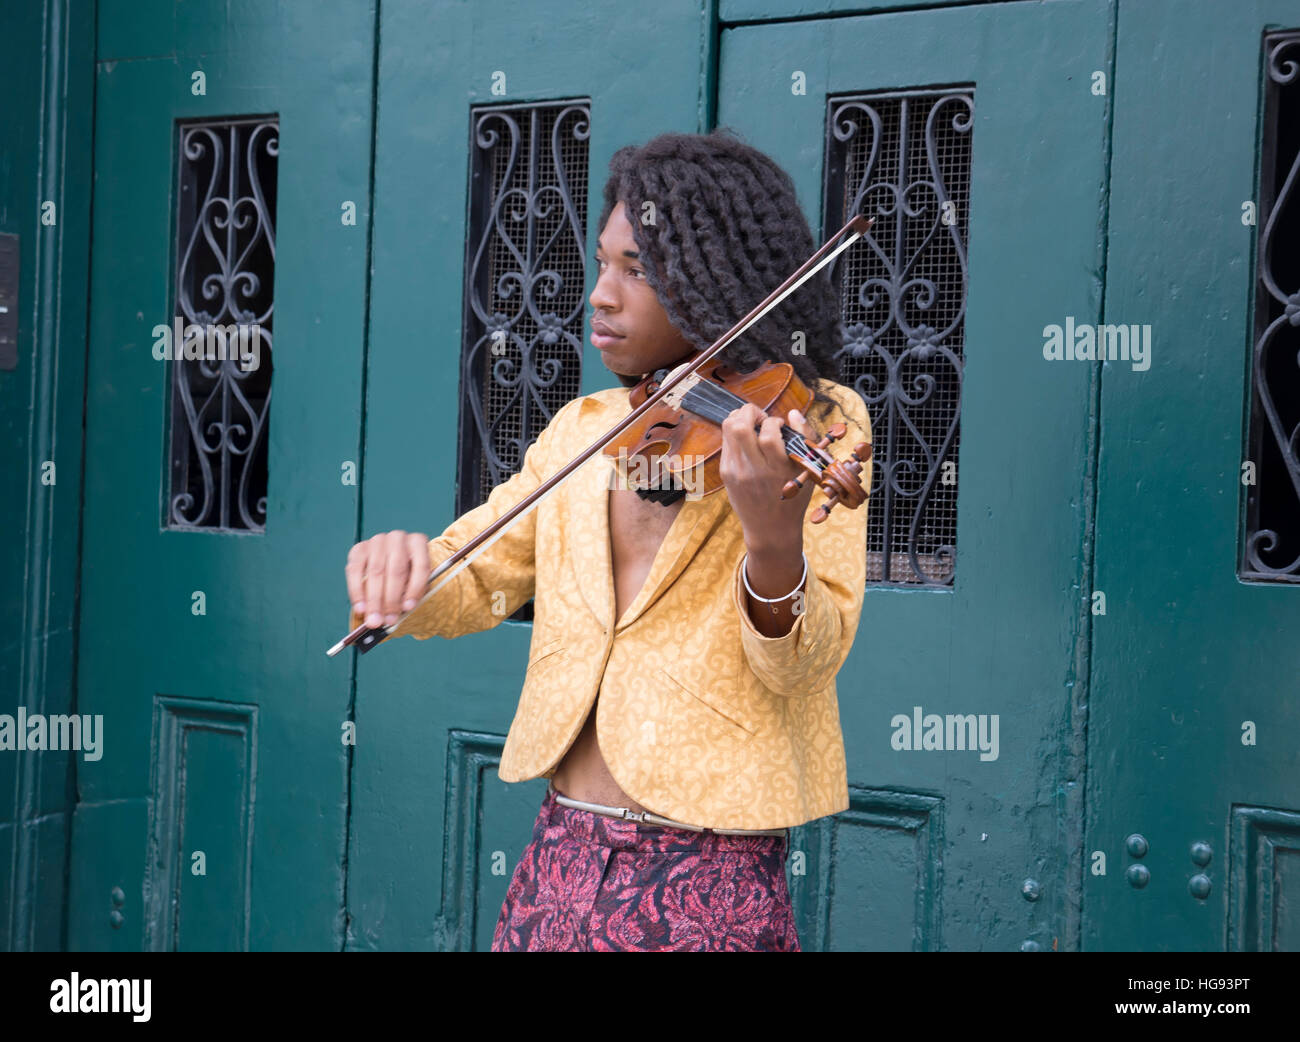 A busker plays the violin in New Orleans French Quarter.  Typical wrought iron decoration on the wooden door in the background. Stock Photo